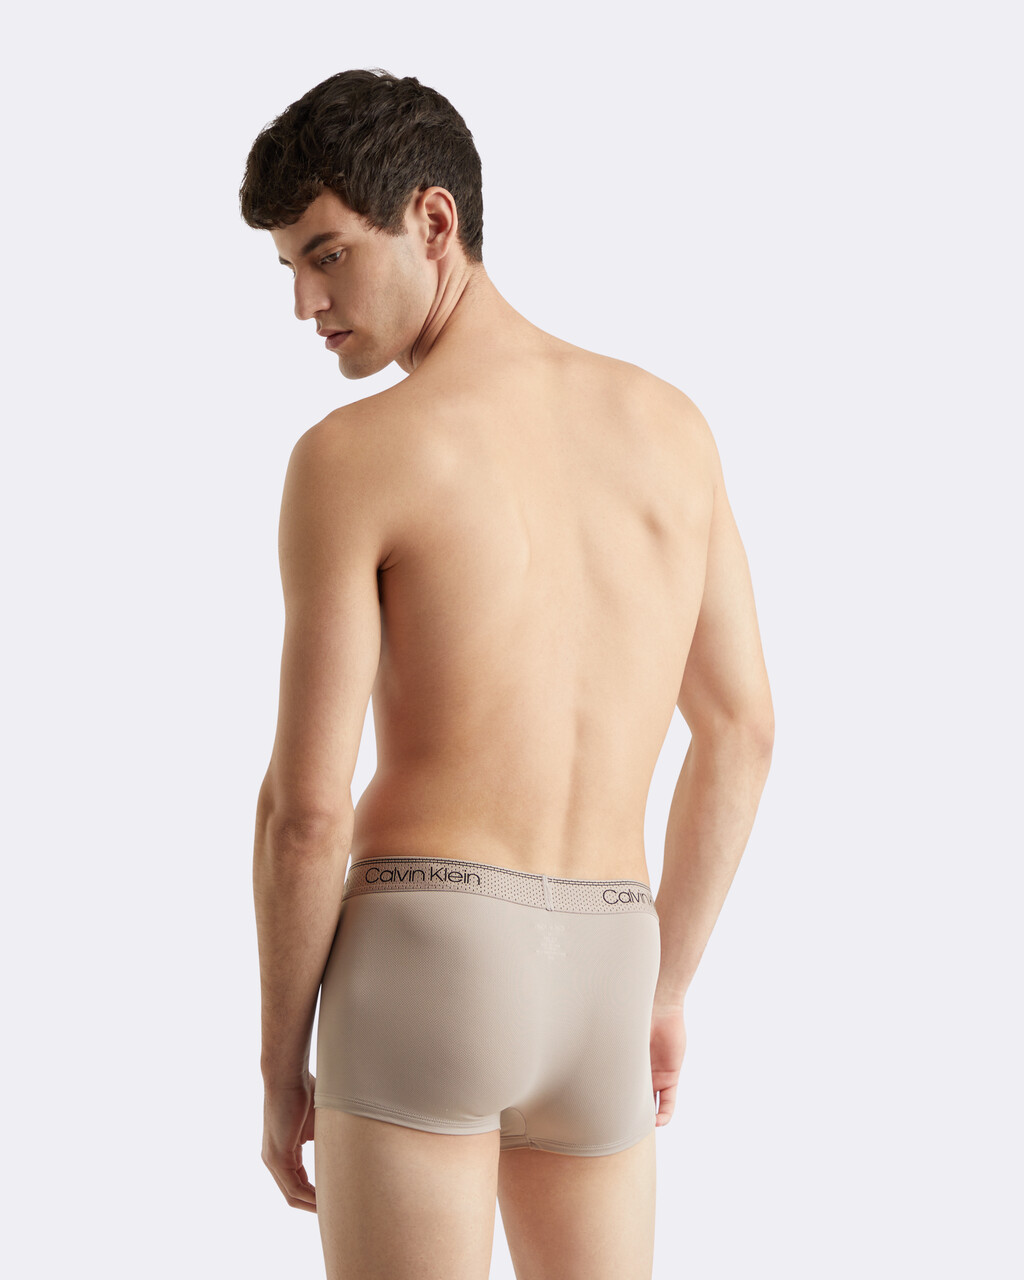 Micro Stretch Cooling Low Rise Trunks, GREY SAND, hi-res